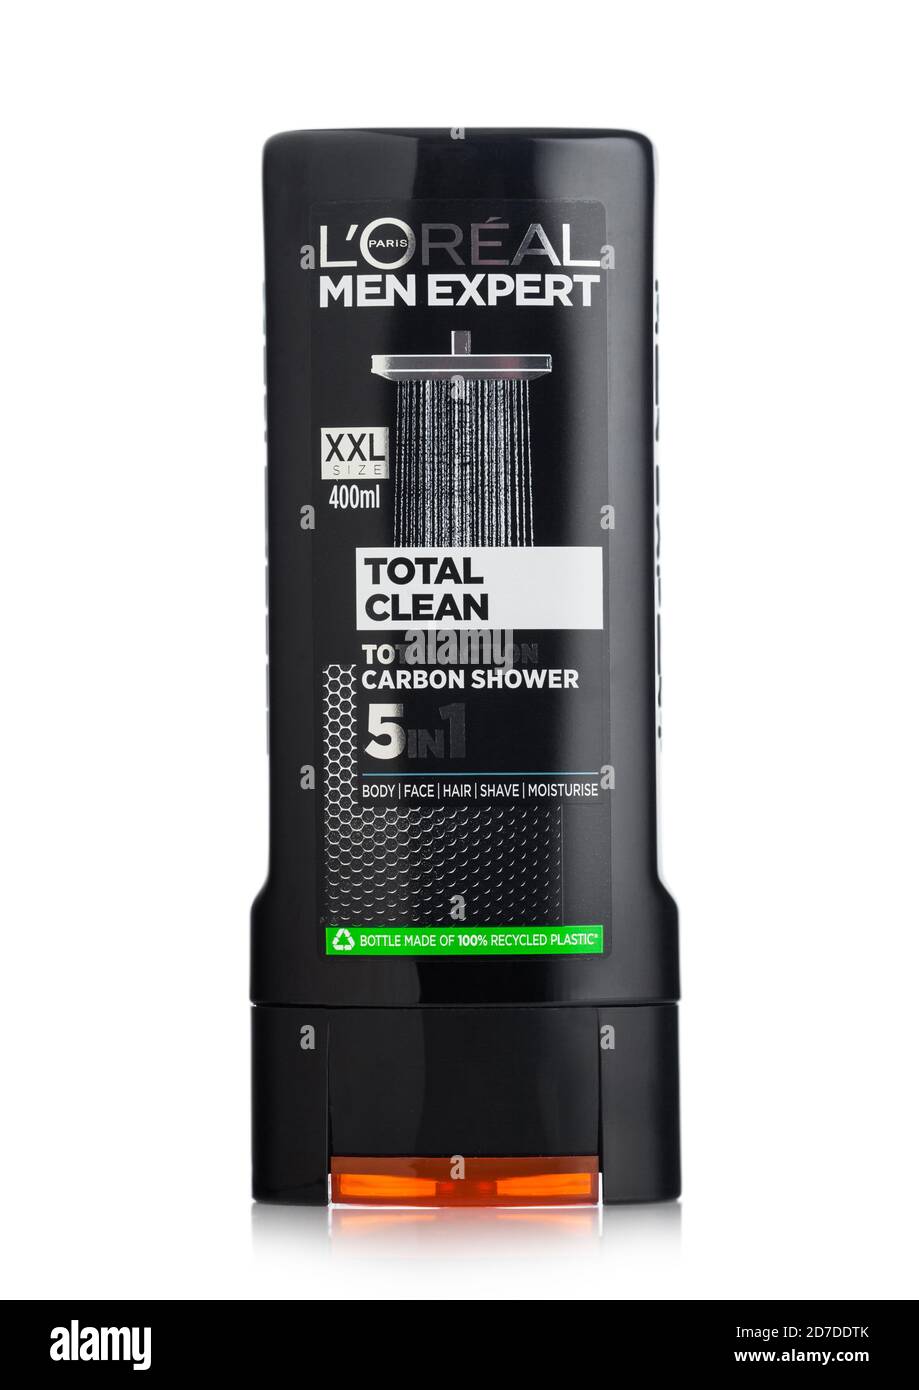 LONDON, UK - 14, 2020: L'oreal men expert 5 in 1 shampoo and shower gel on white background Stock Photo - Alamy